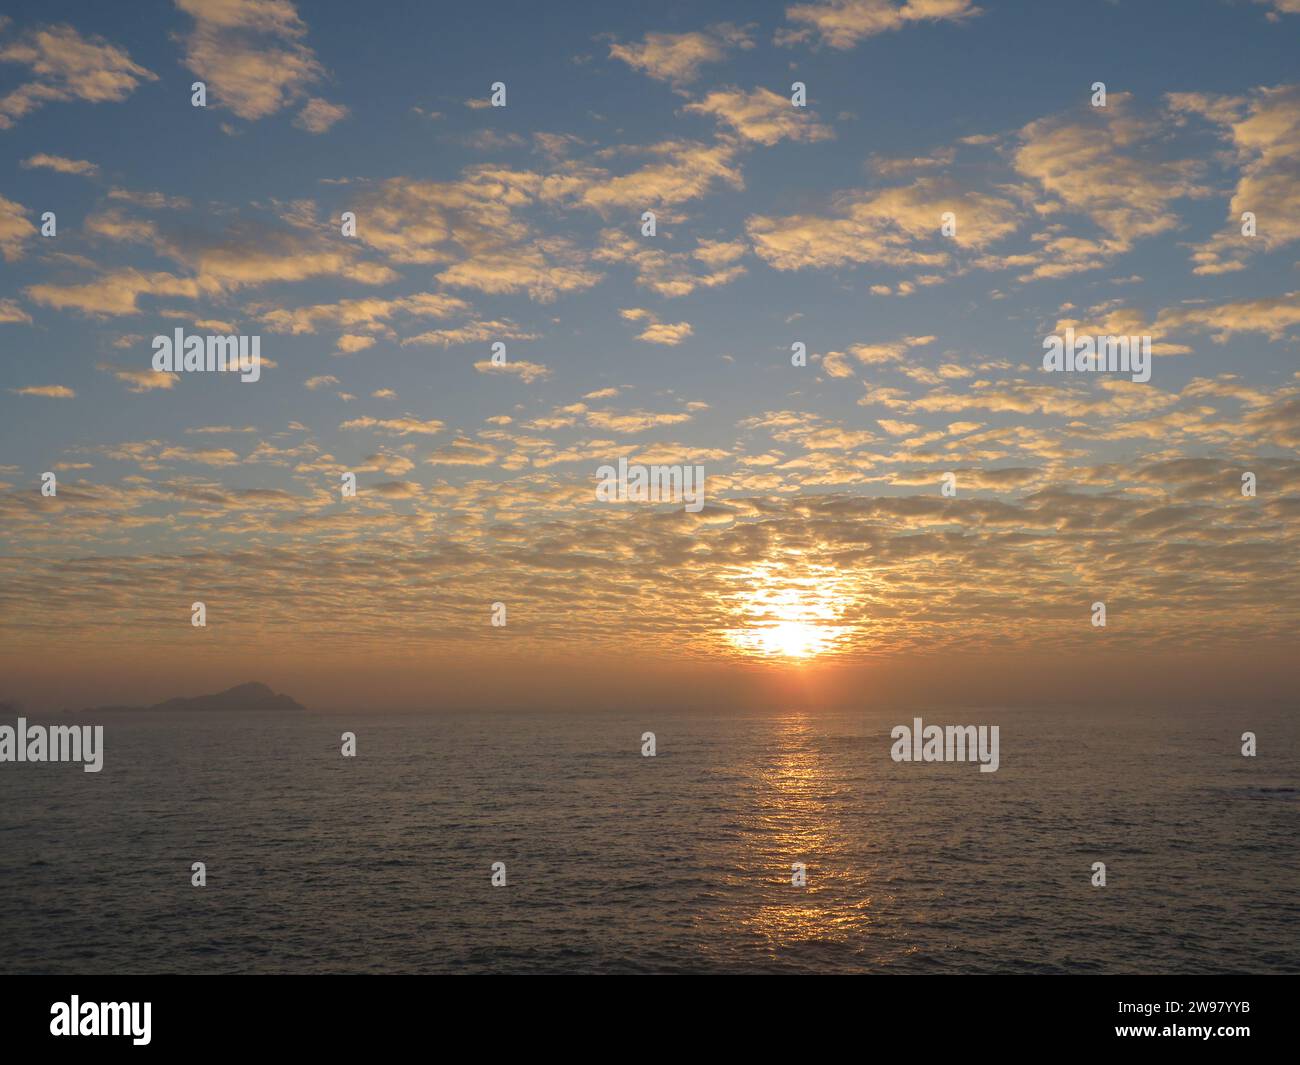 A stunning view of a picturesque shoreline, at sunset illuminating the tranquil waters below Stock Photo